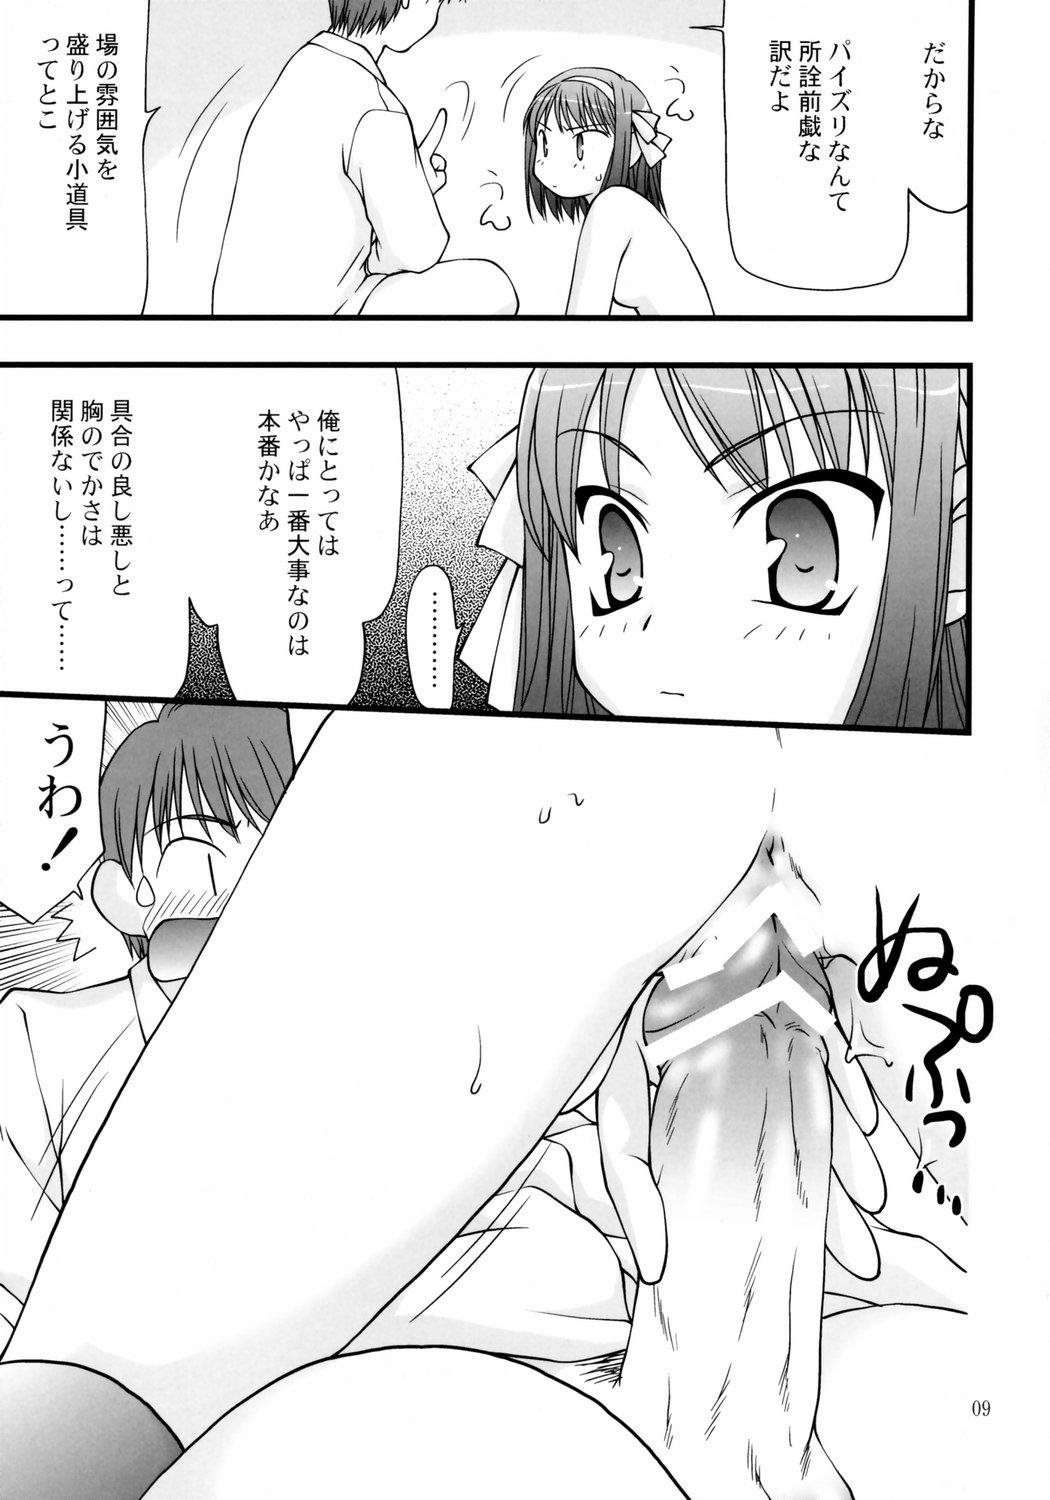 Livecams Super Oppai Suplex! - The melancholy of haruhi suzumiya Family Taboo - Page 8